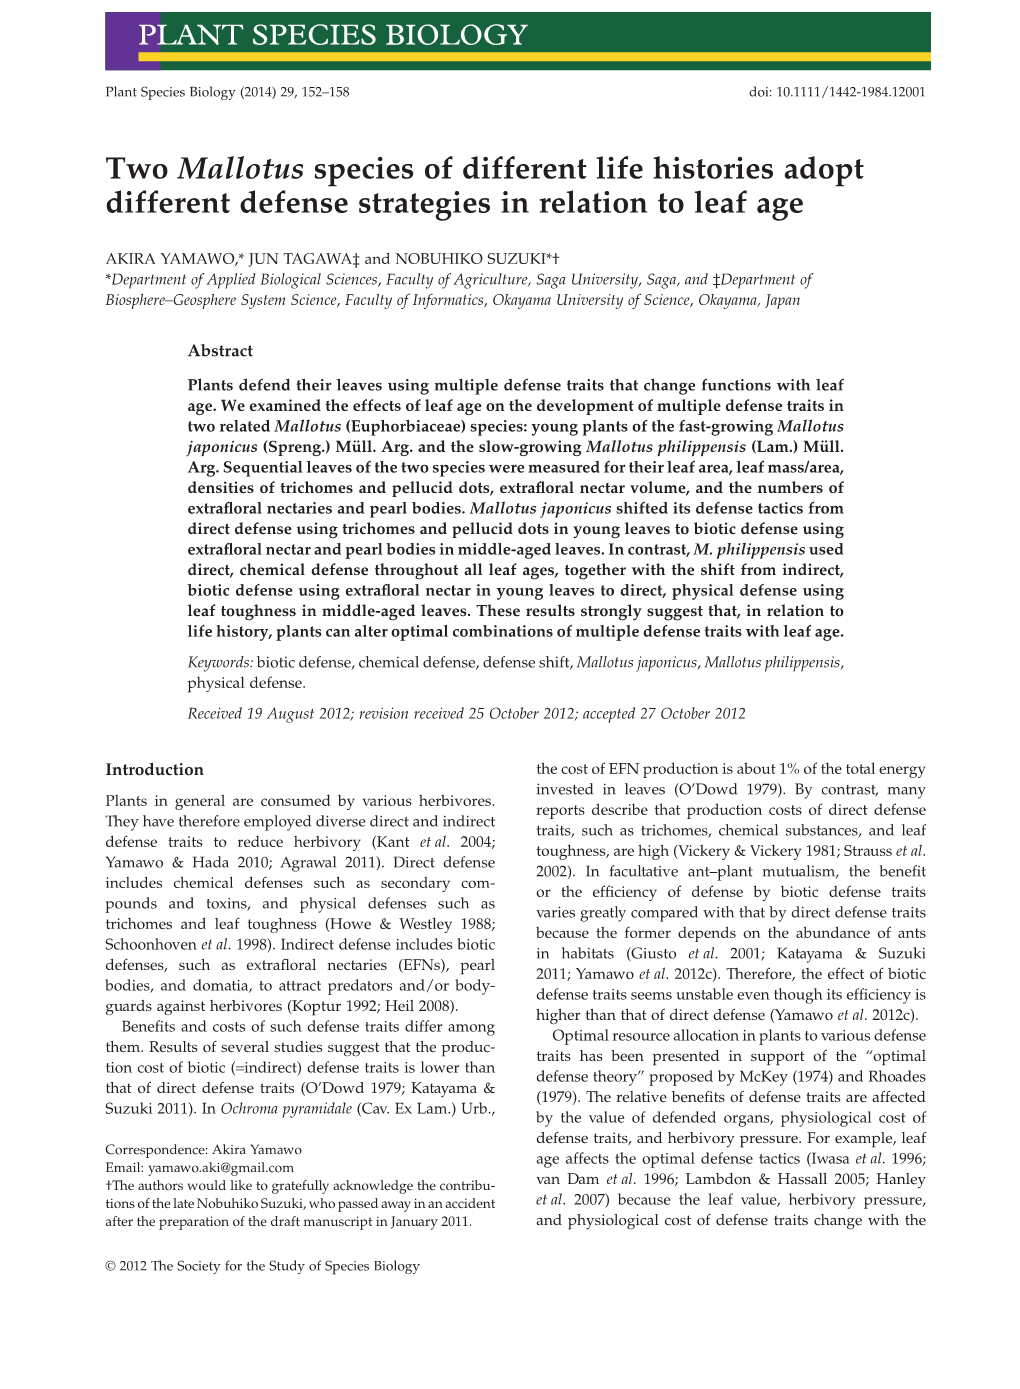 Two Mallotus Species of Different Life Histories Adopt Different Defense Strategies in Relation to Leaf Age